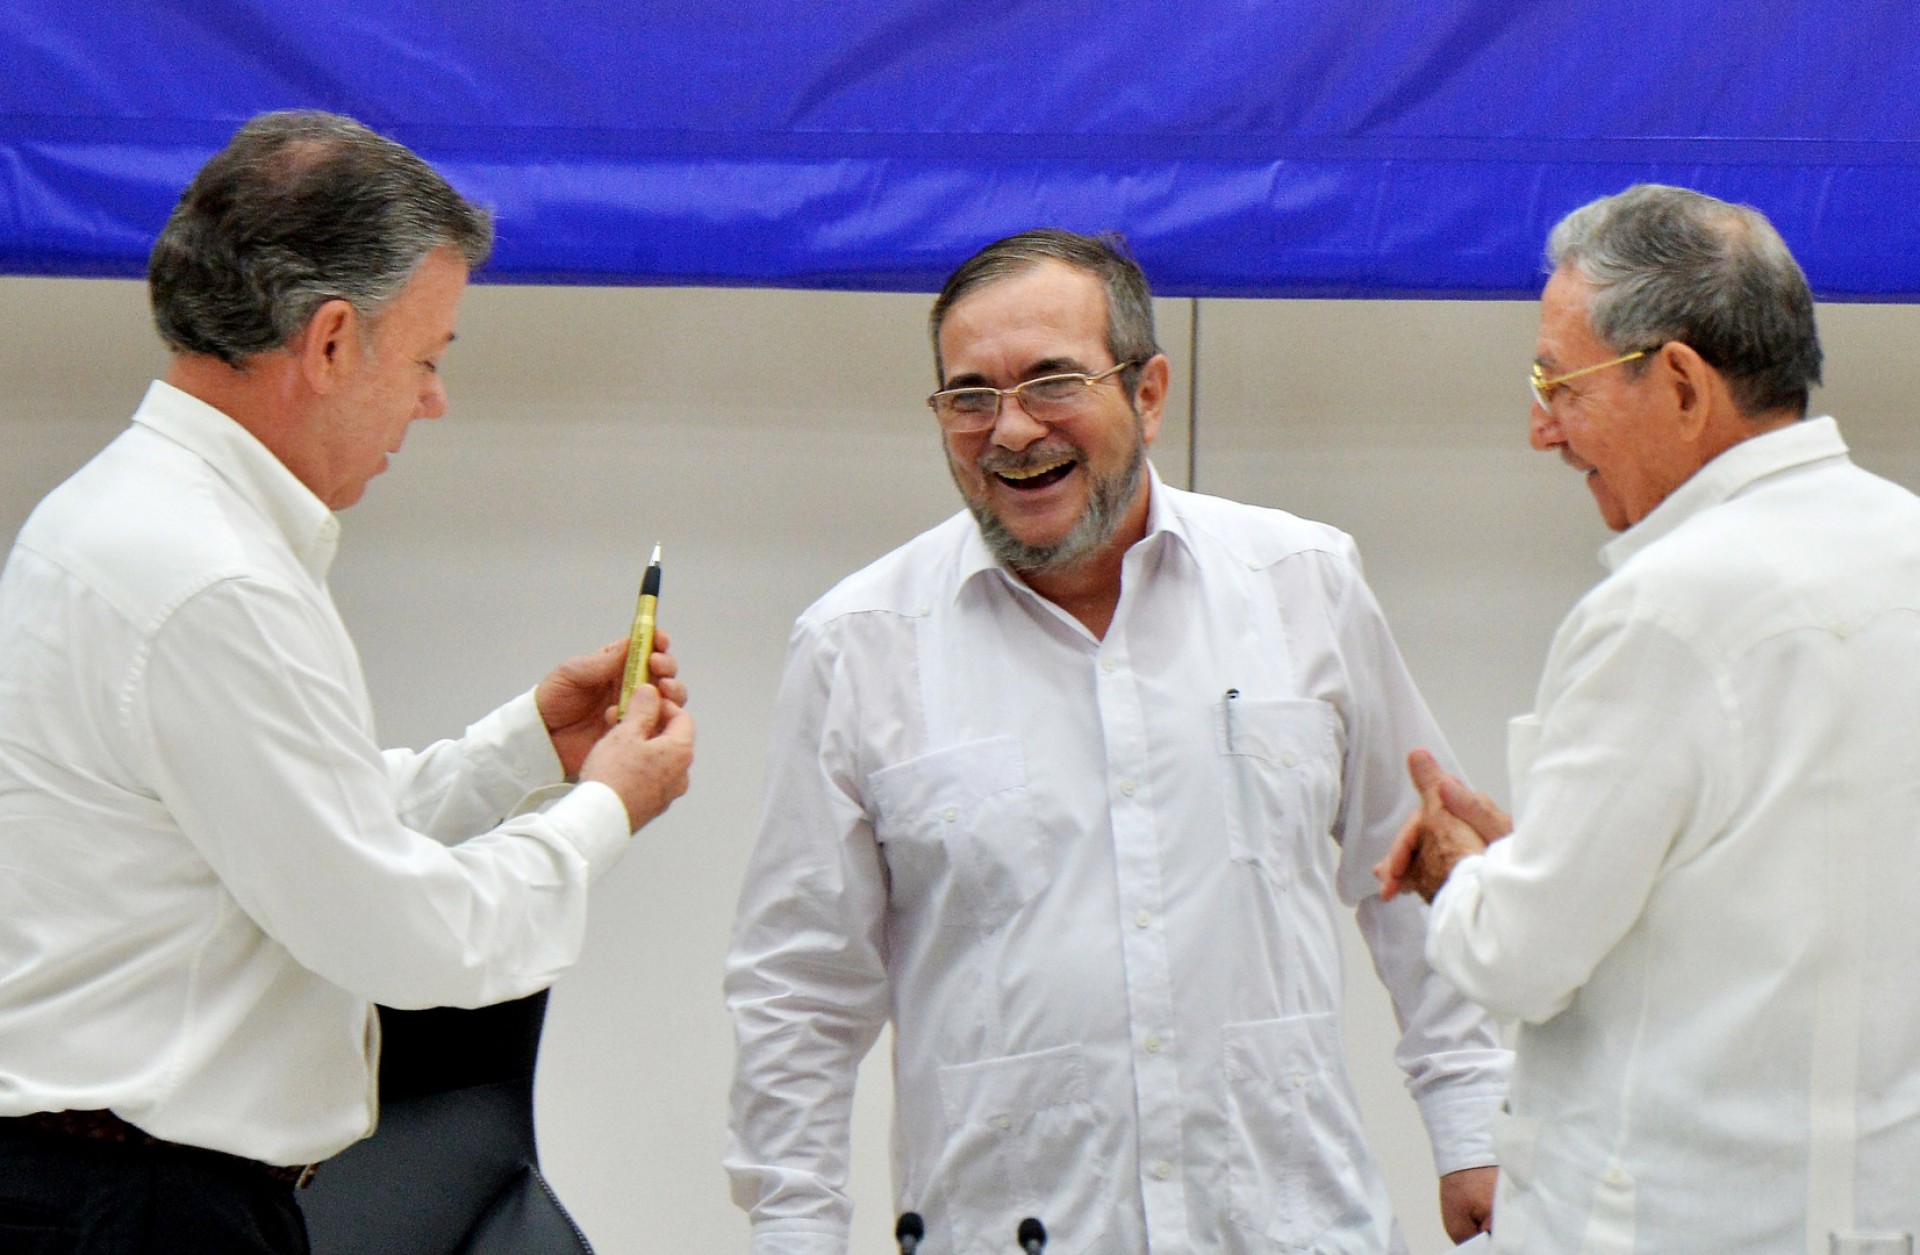 Colombia's president signed a peace deal with the head of the FARC militant group in Cuba on Aug. 23. The Colombian public must now approve the deal.